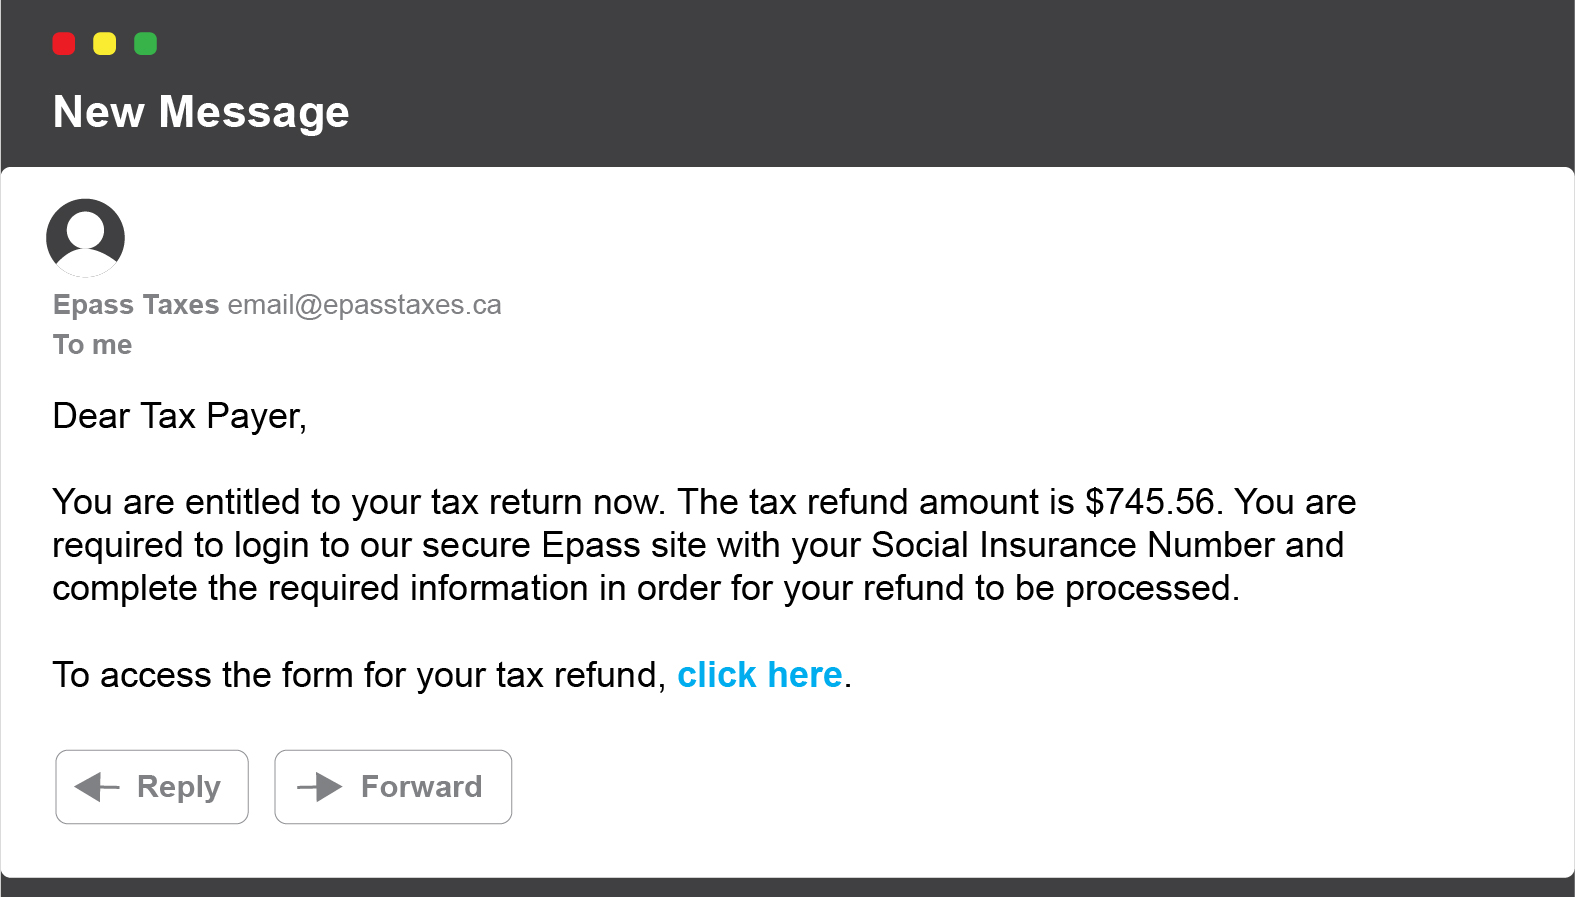 New message: Dear Tax Payer, You are entitled to your tax return now. The tax refund amount is $745.56. You are required to login to our secure Epass site with your Social Insurance Number and complete the required information in order for your refund to be processed. To access the form for your tax refund, click here.